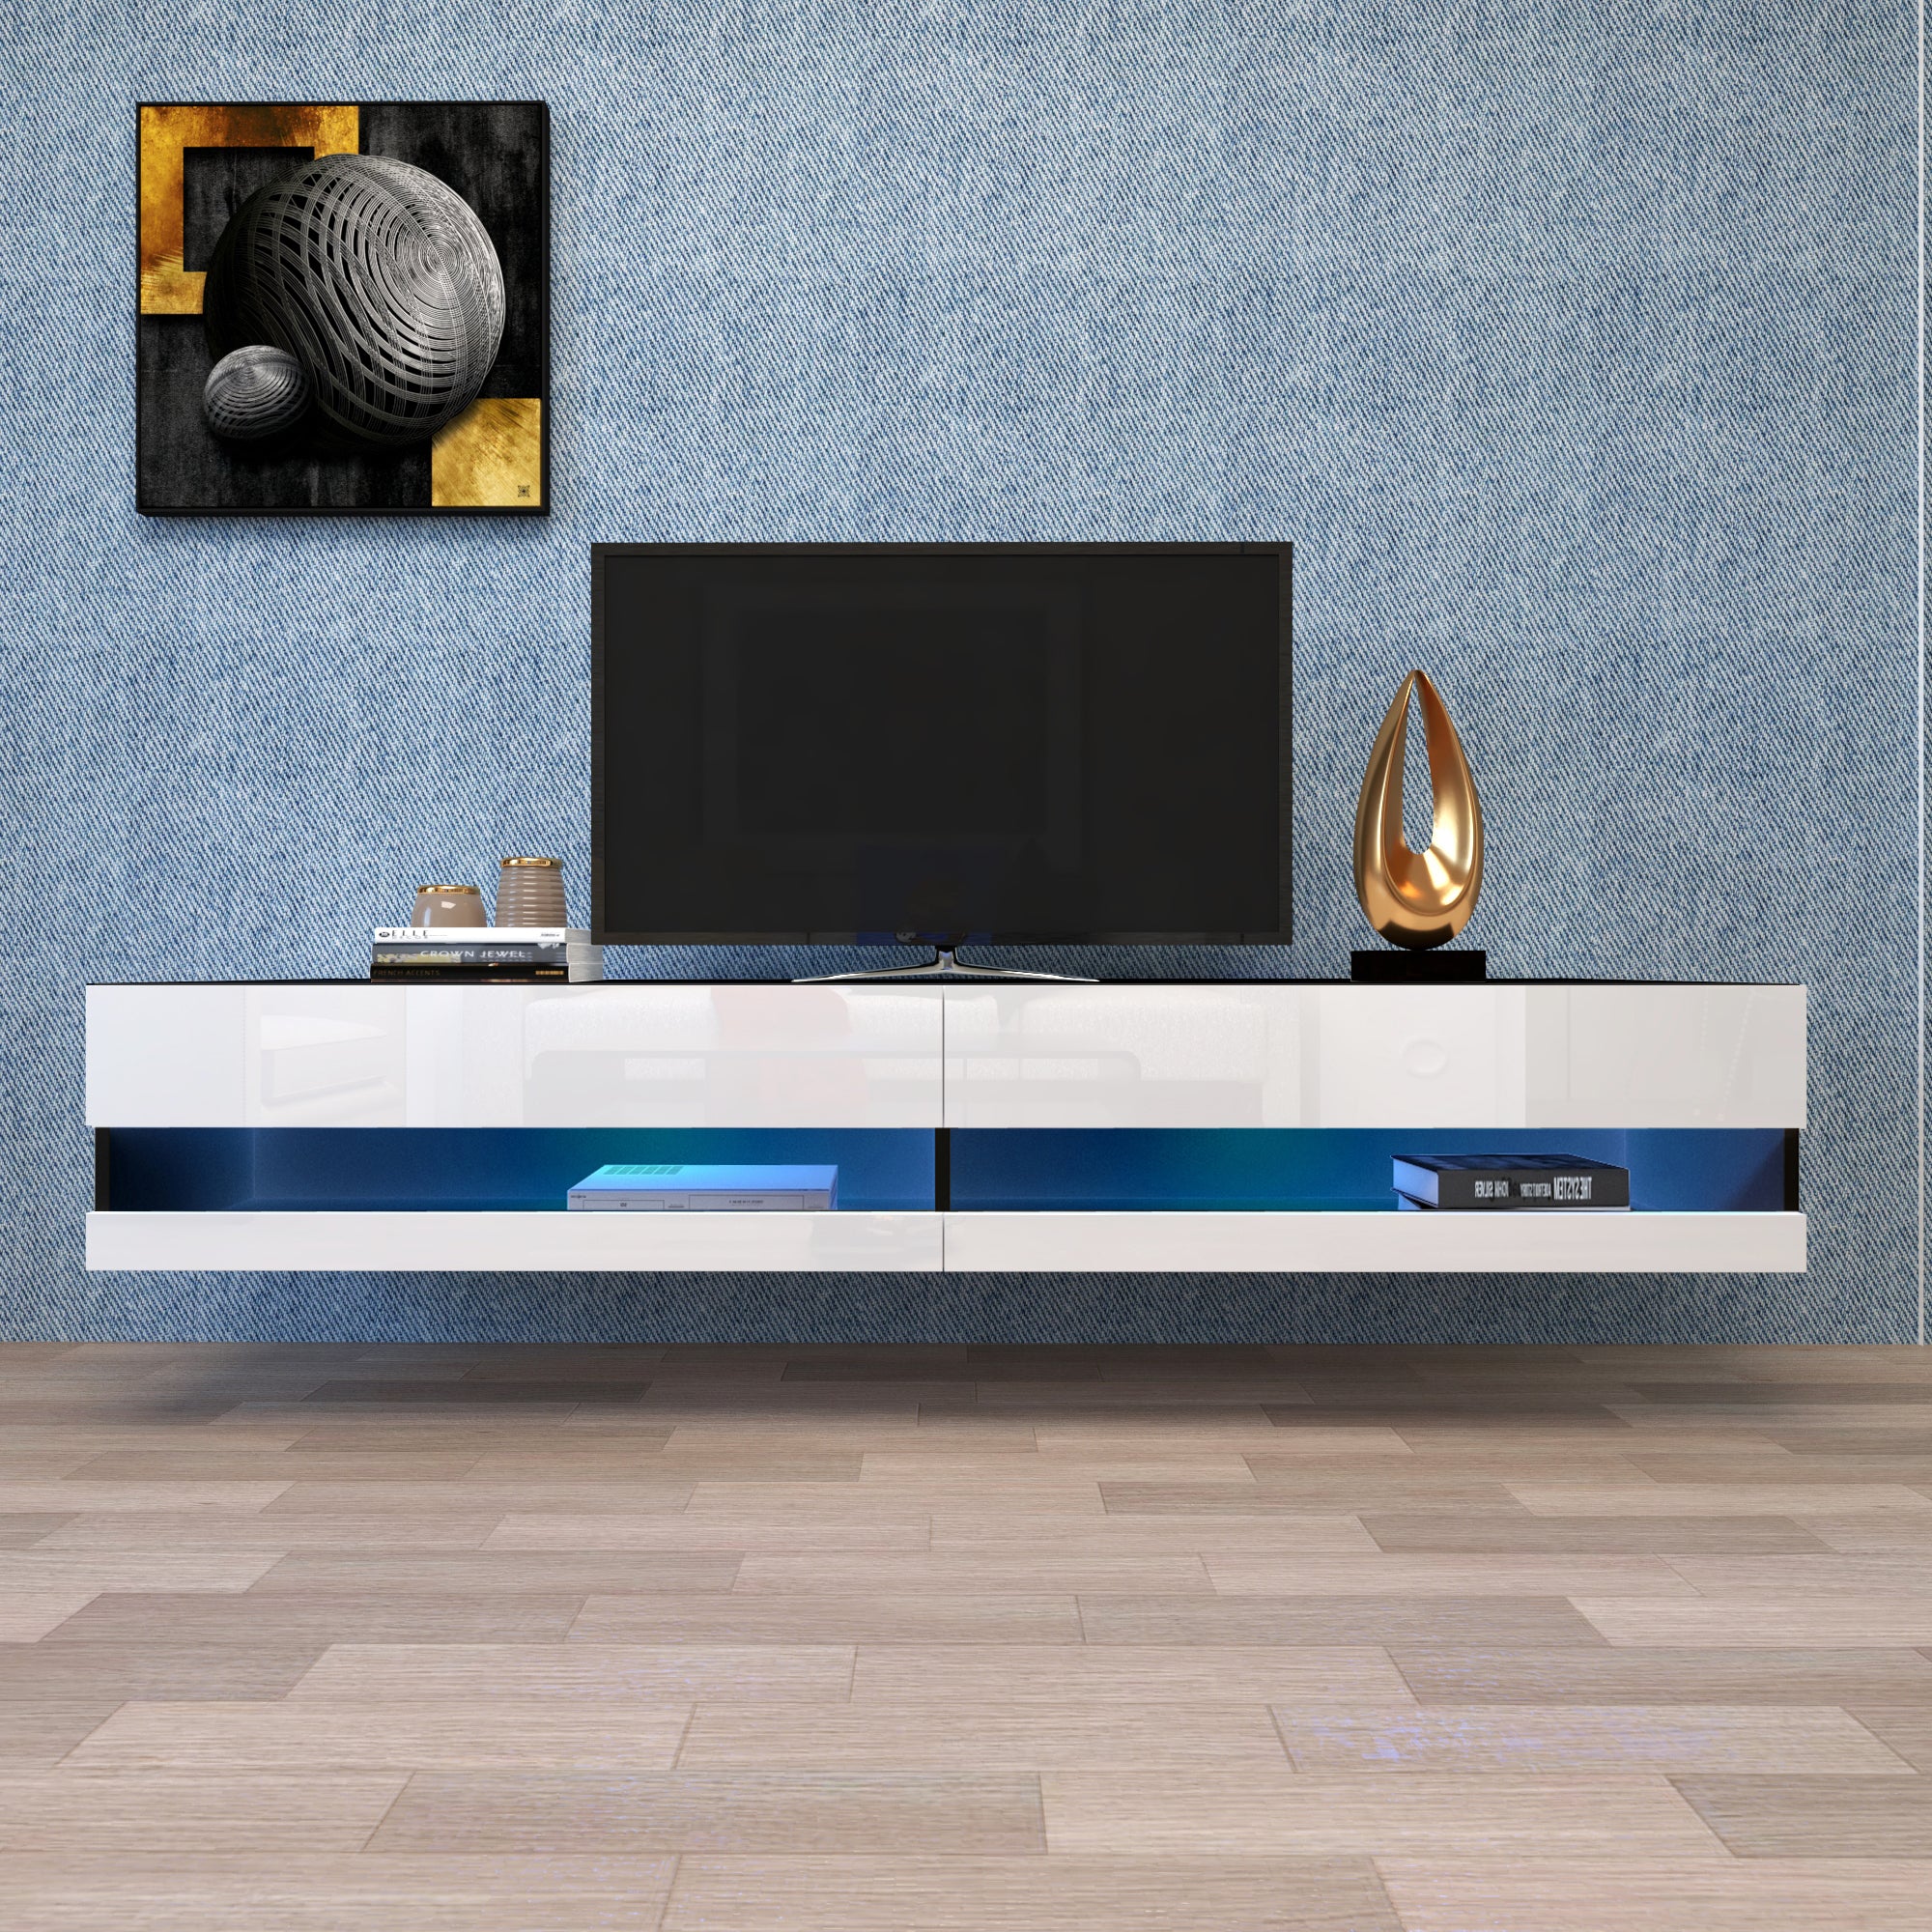 180 Wall Mounted Floating 80 Inch TV Stand with Color LED